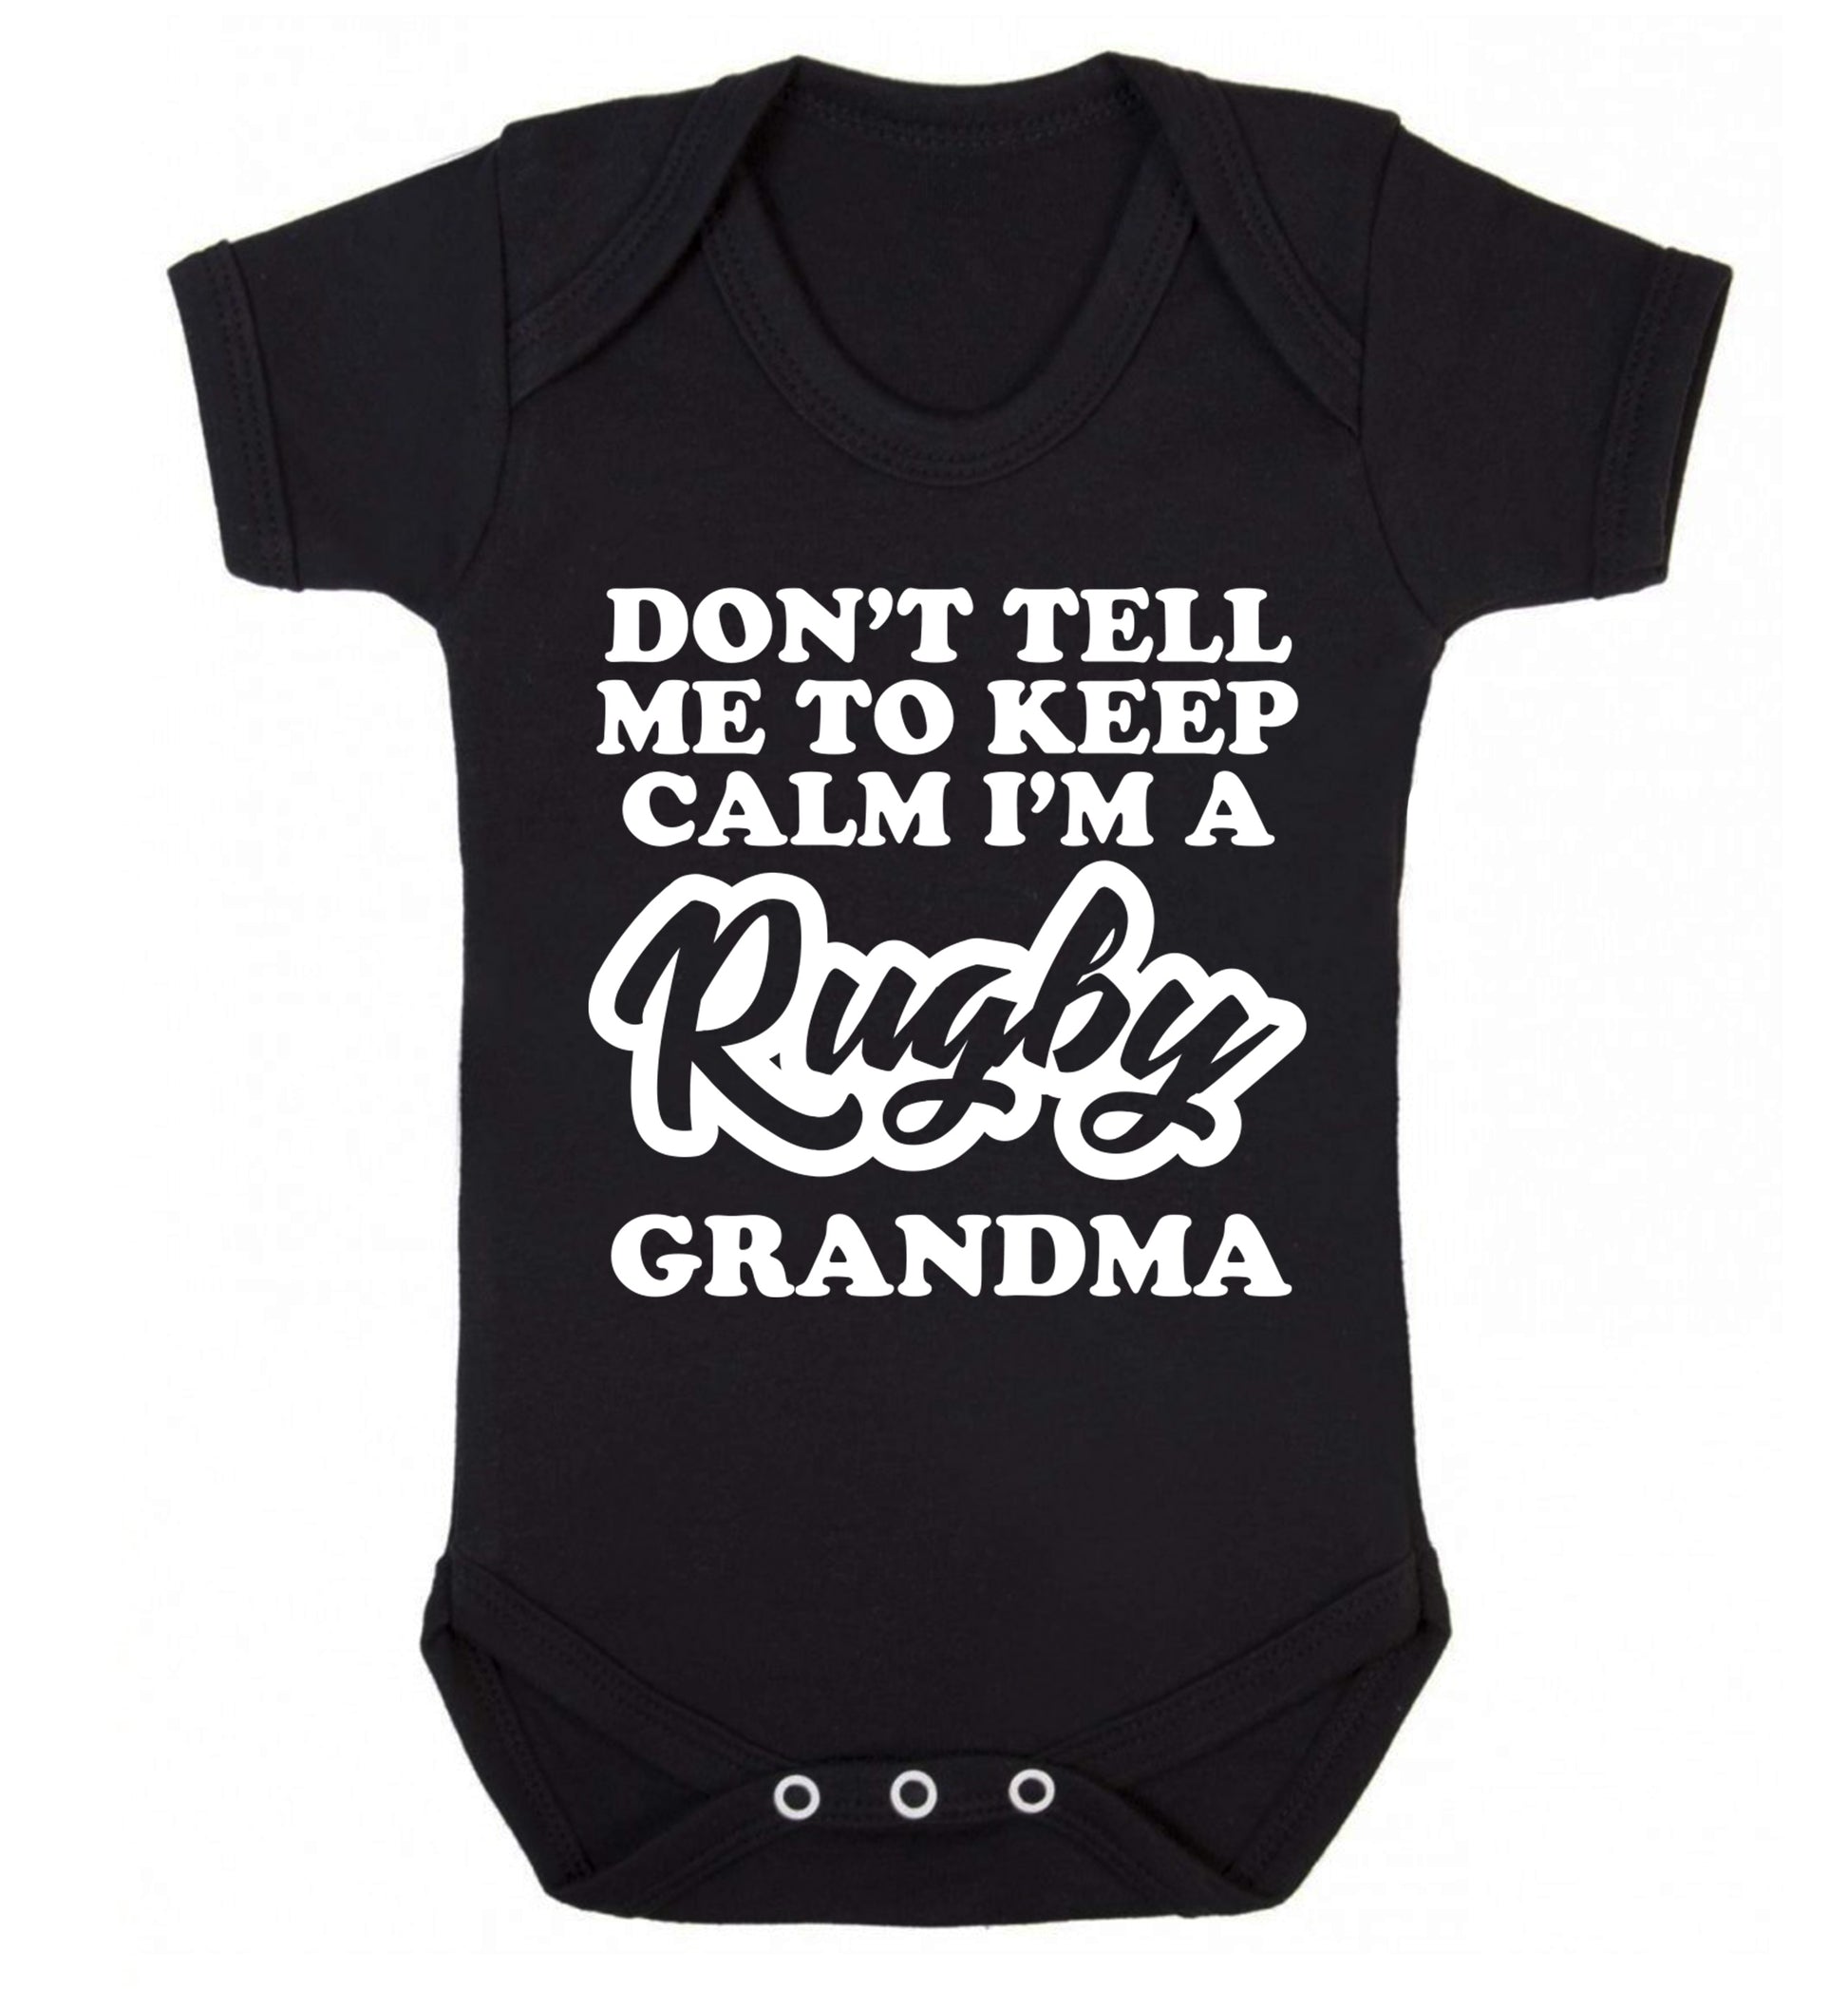 Don't tell me to keep calm I'm a rugby grandma Baby Vest black 18-24 months